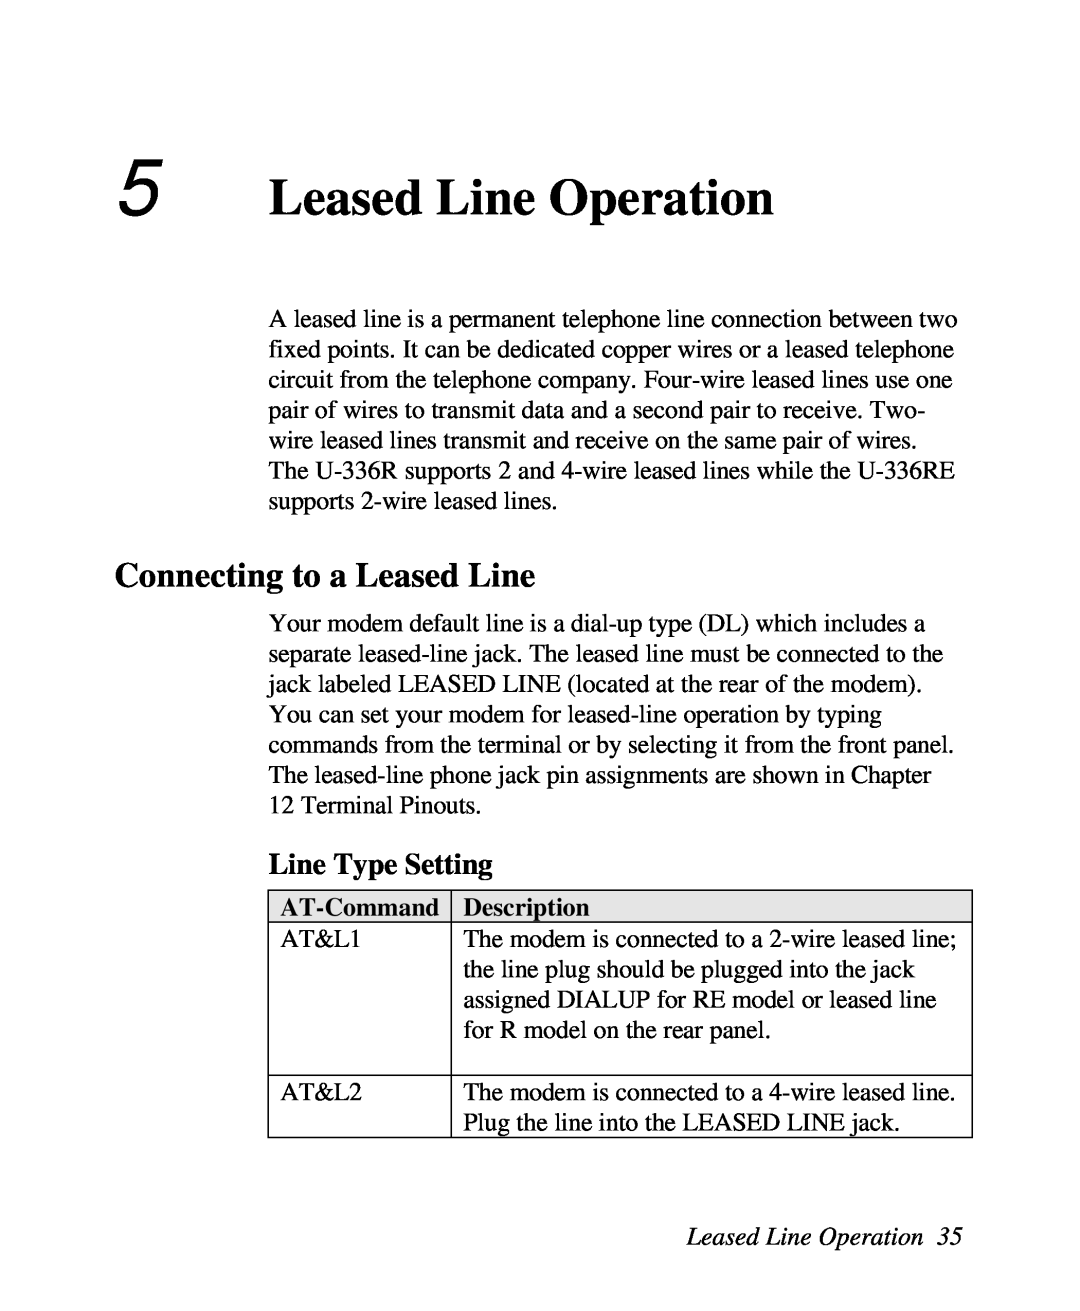 ZyXEL Communications U-336R/RE manual Leased Line Operation, Connecting to a Leased Line, Line Type Setting 